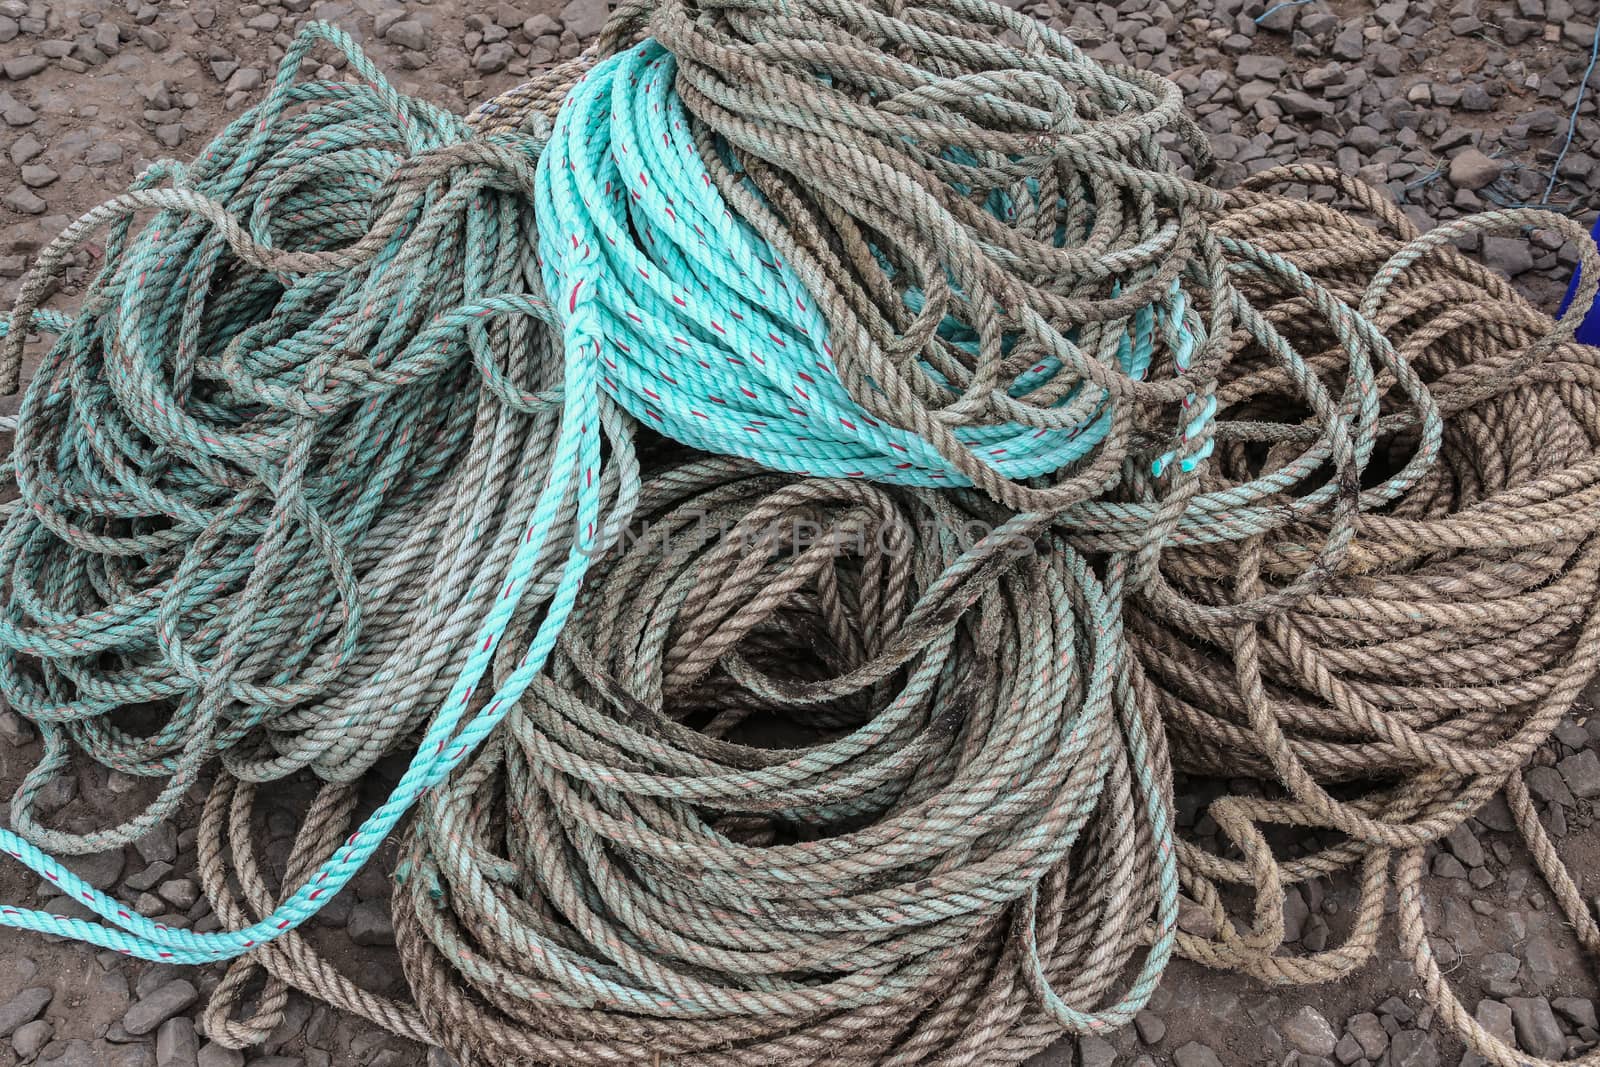 A pile of rope used on a fishing boat